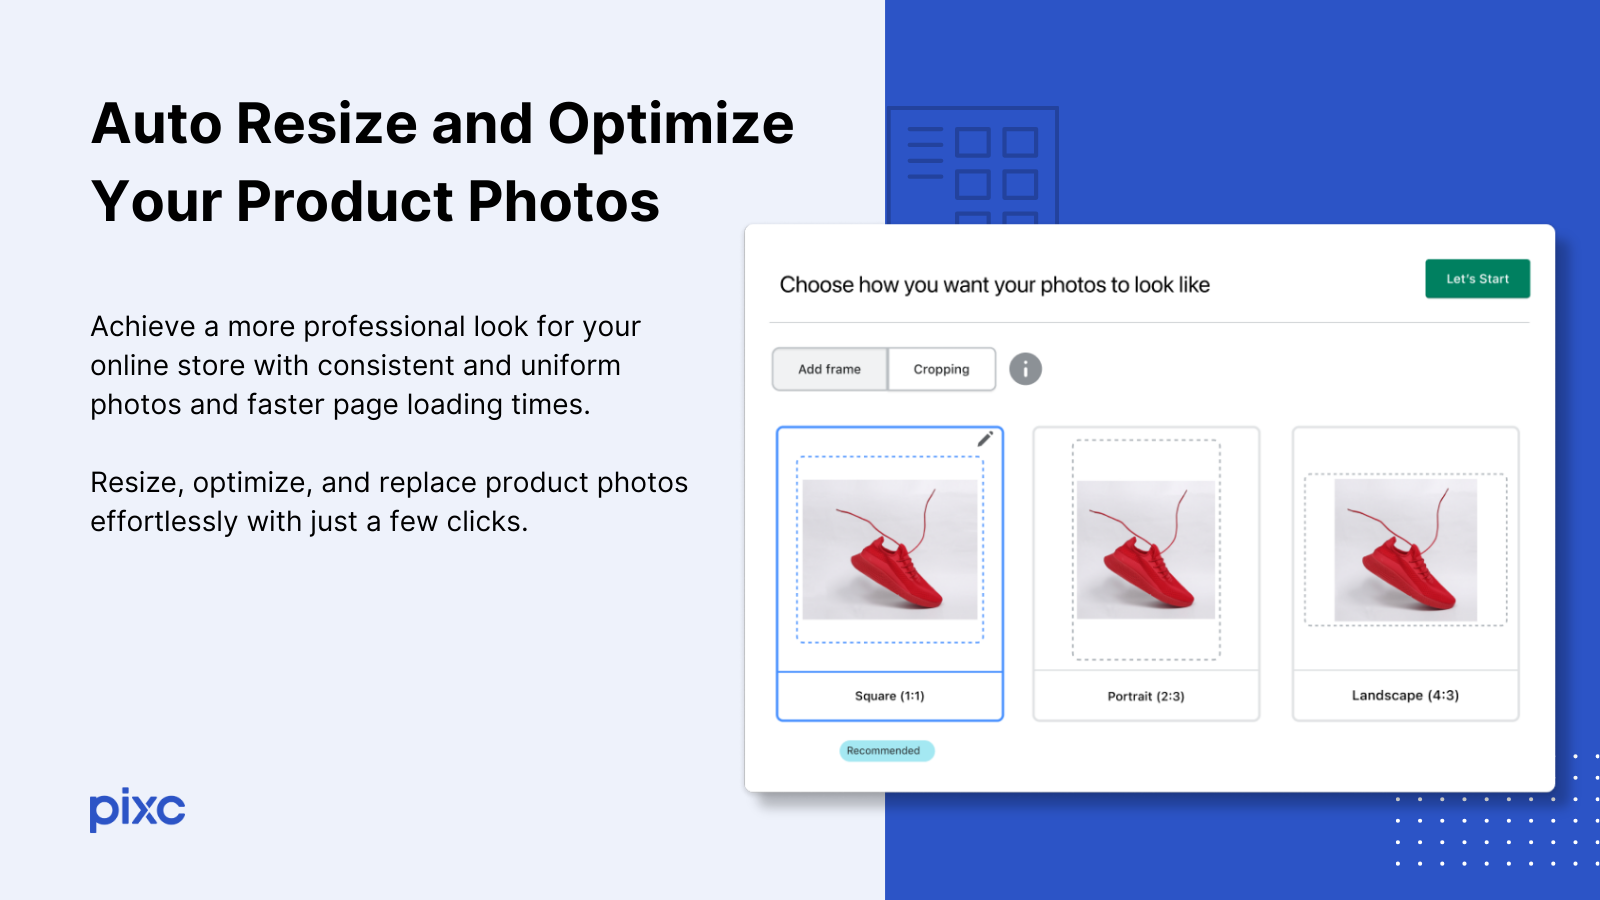 Auto Resize and Optimize Your Product Photos